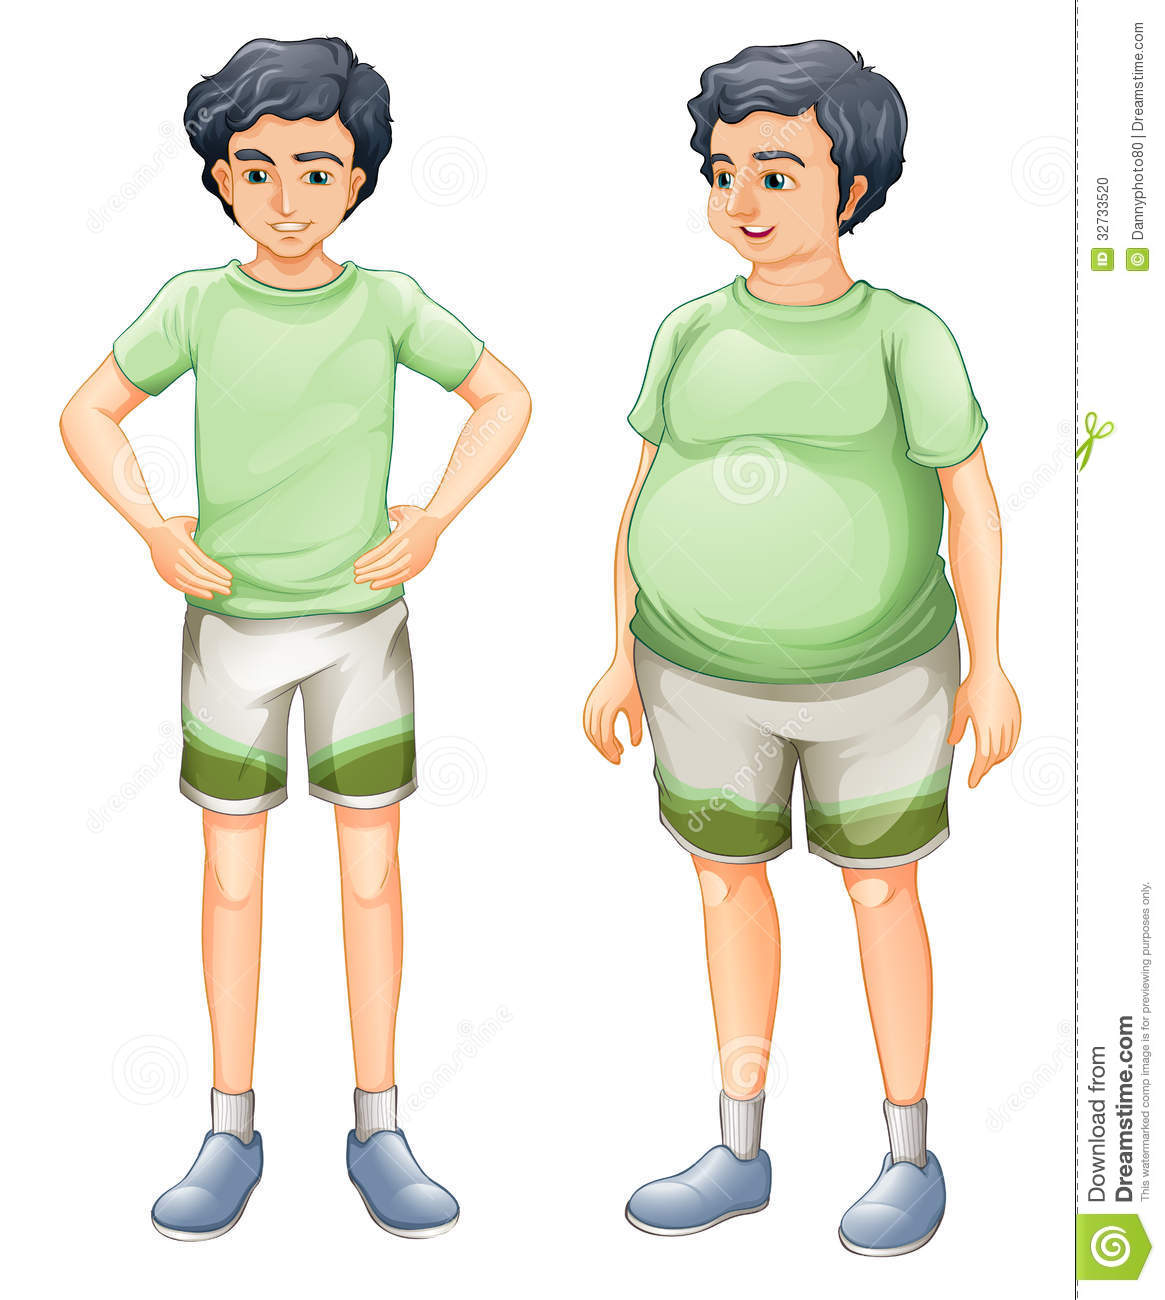 Illustration Of The Two Boys With Same Shirt But Of Different Body